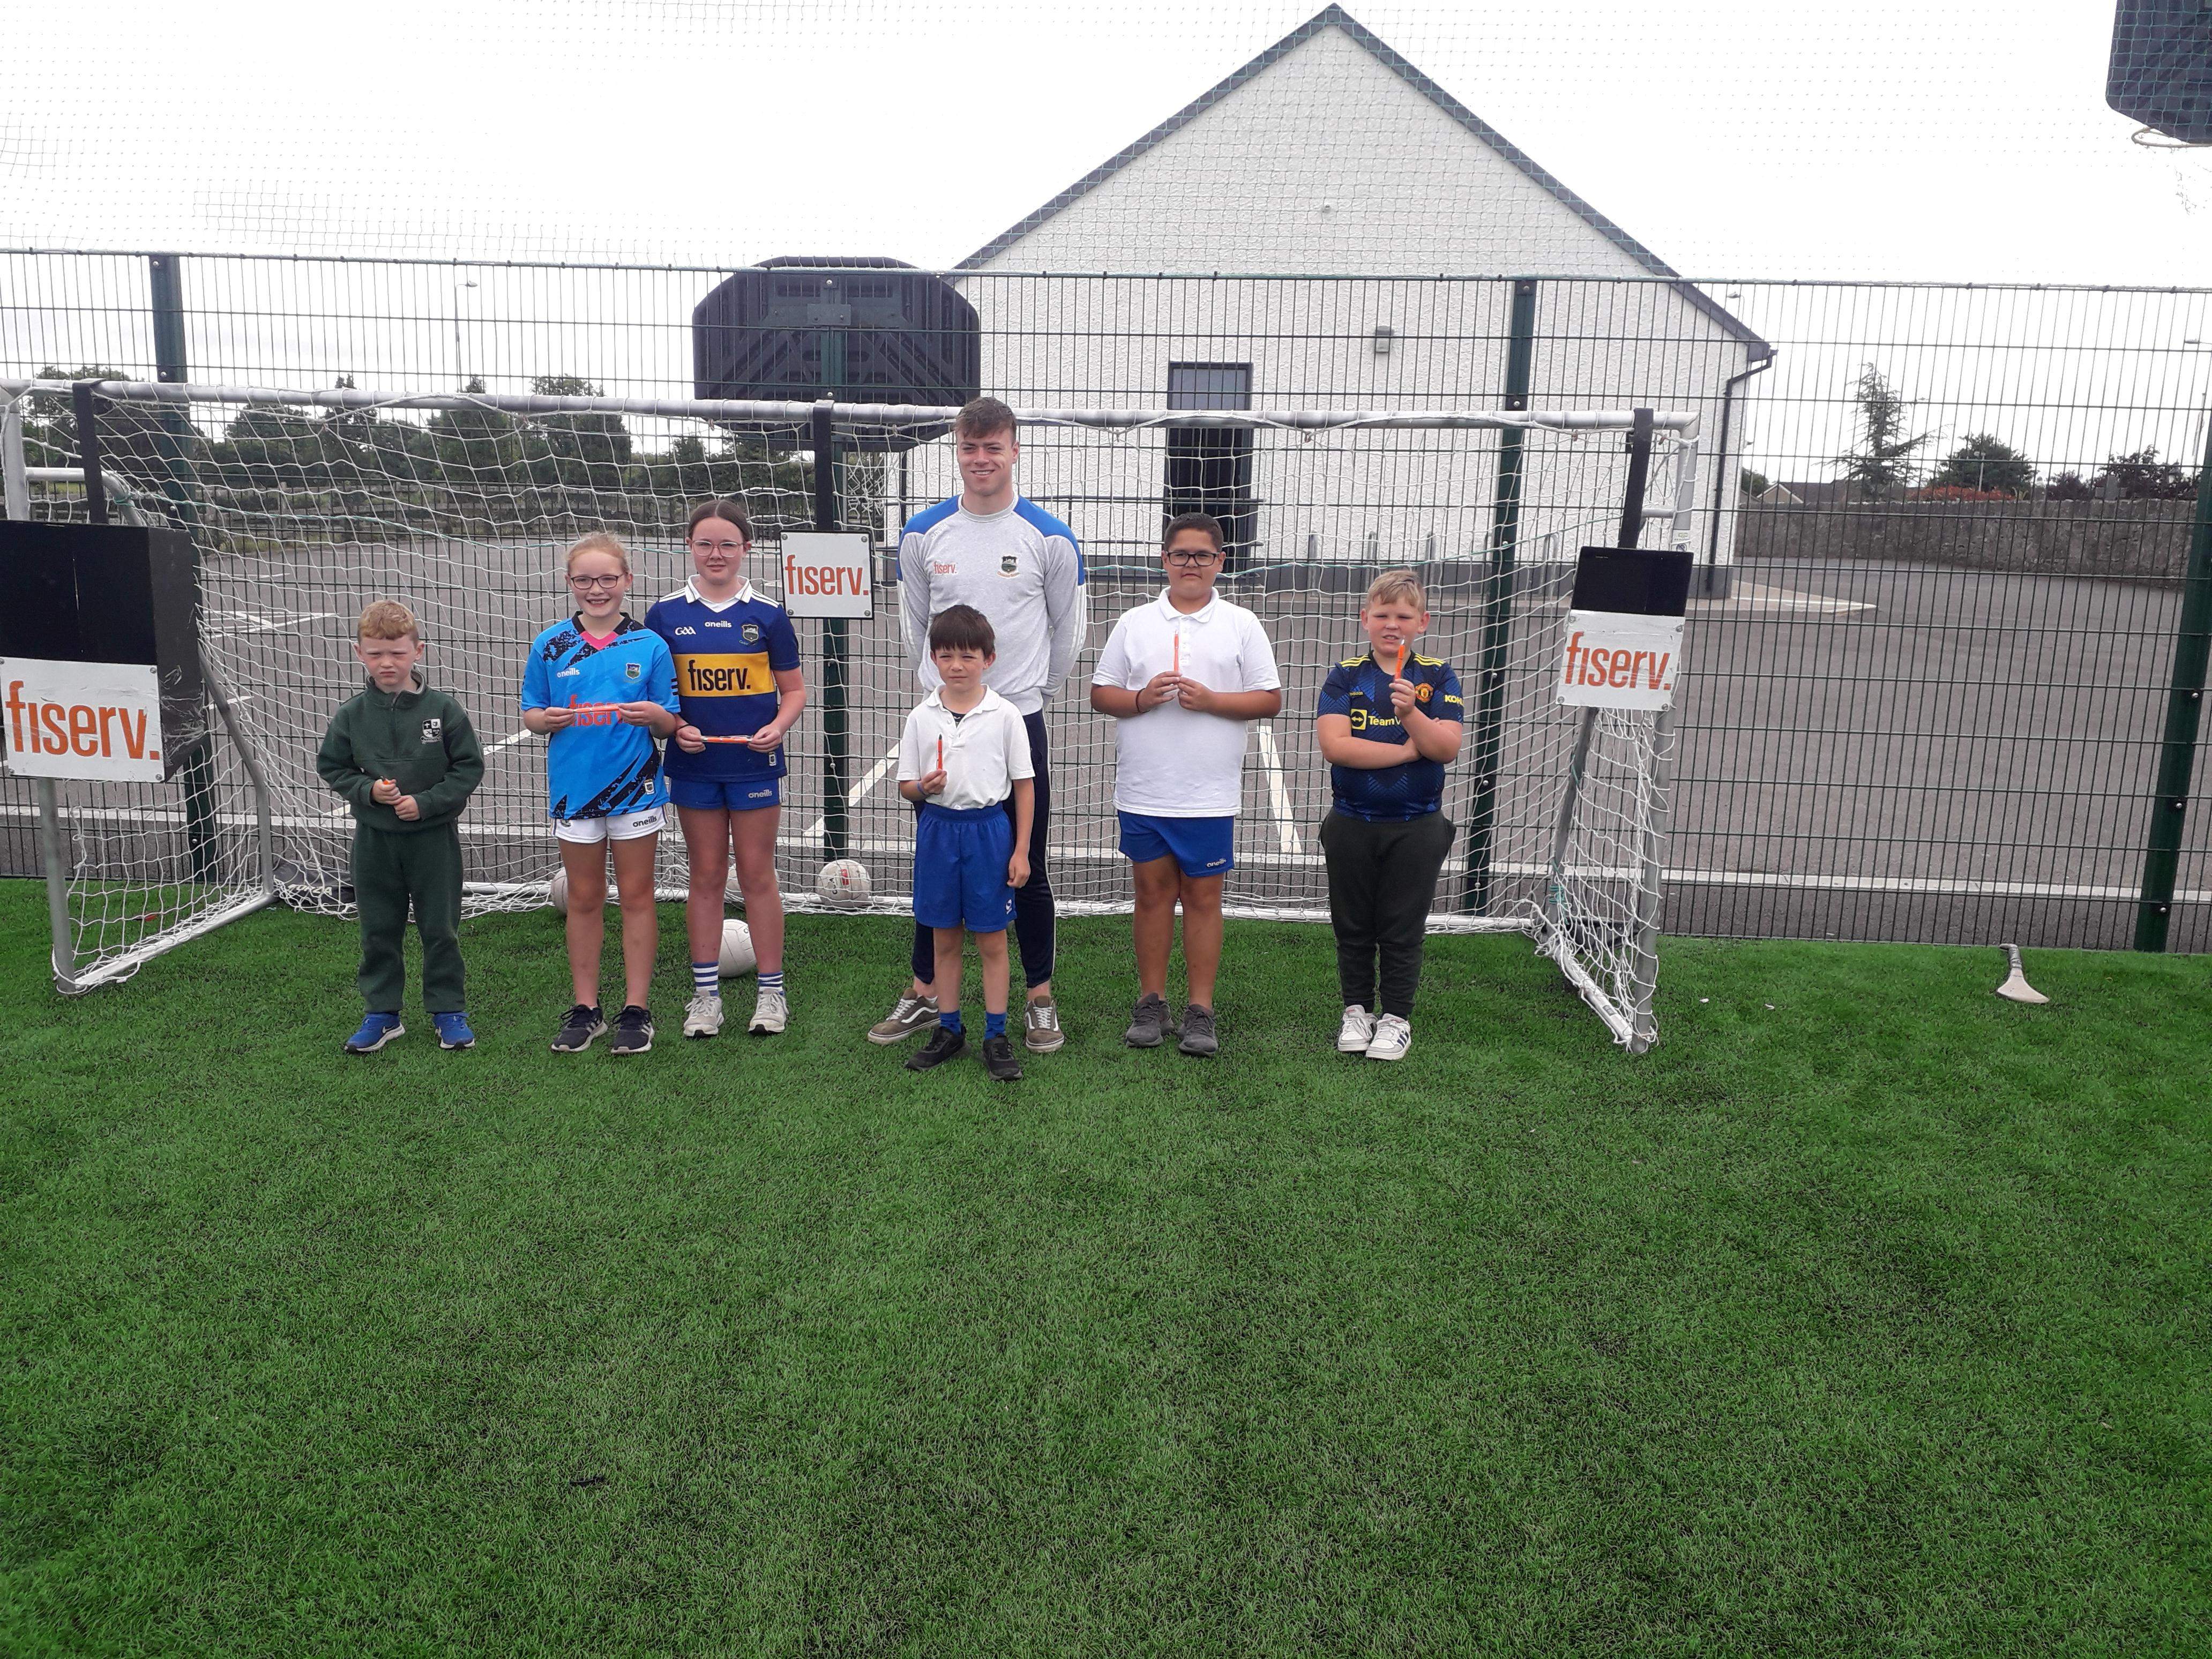 A Visit from Tipperary Hurler Conor Bowe